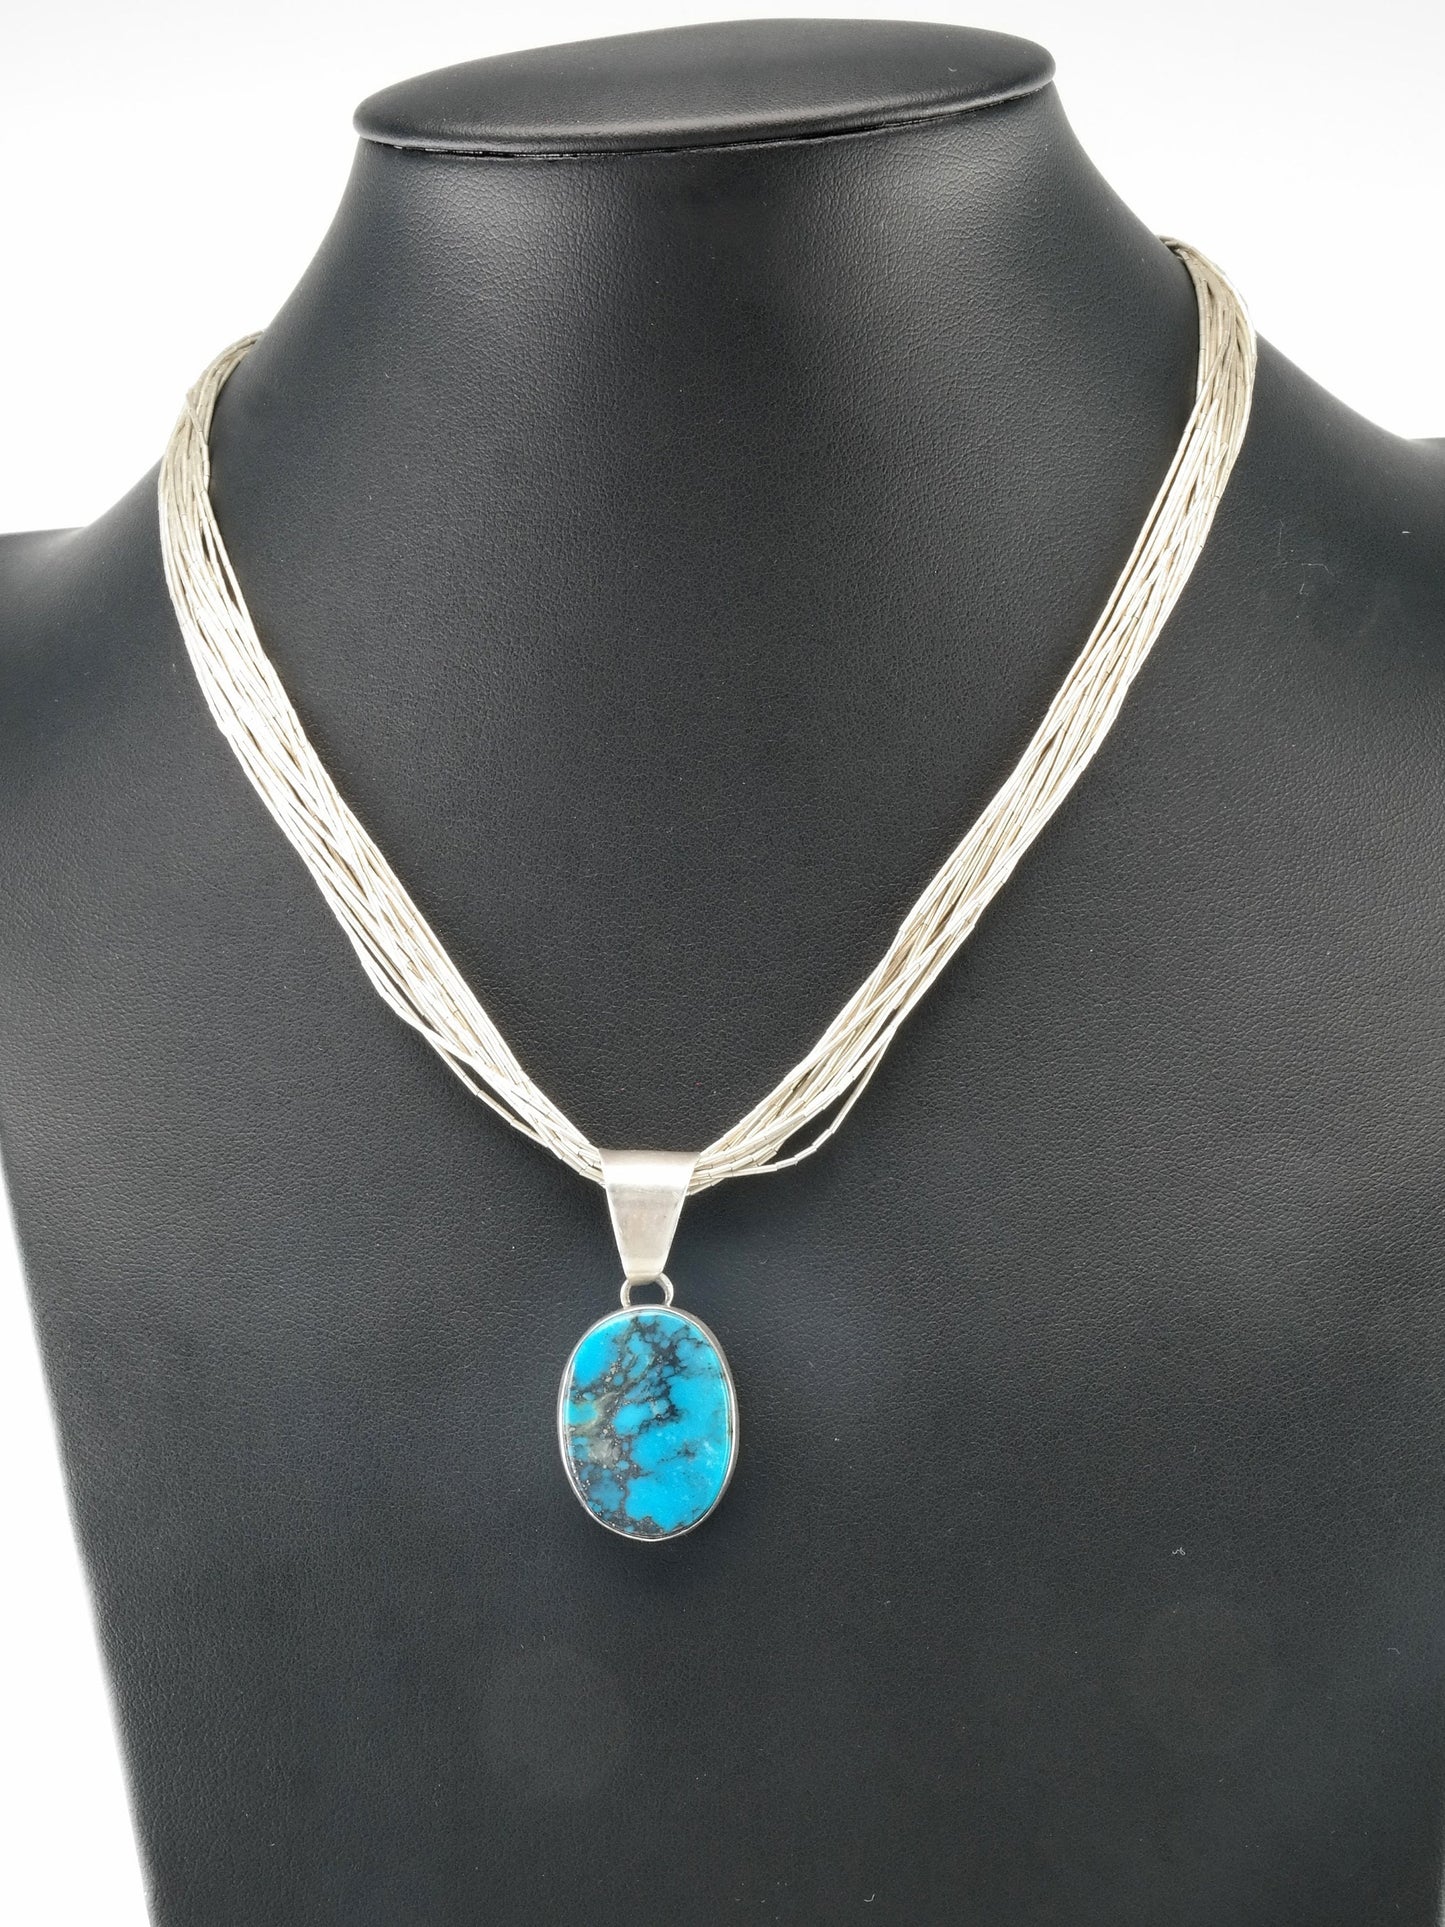 Vintage Native American Blue Turquoise, Pendant Liquid Sterling Silver Necklace